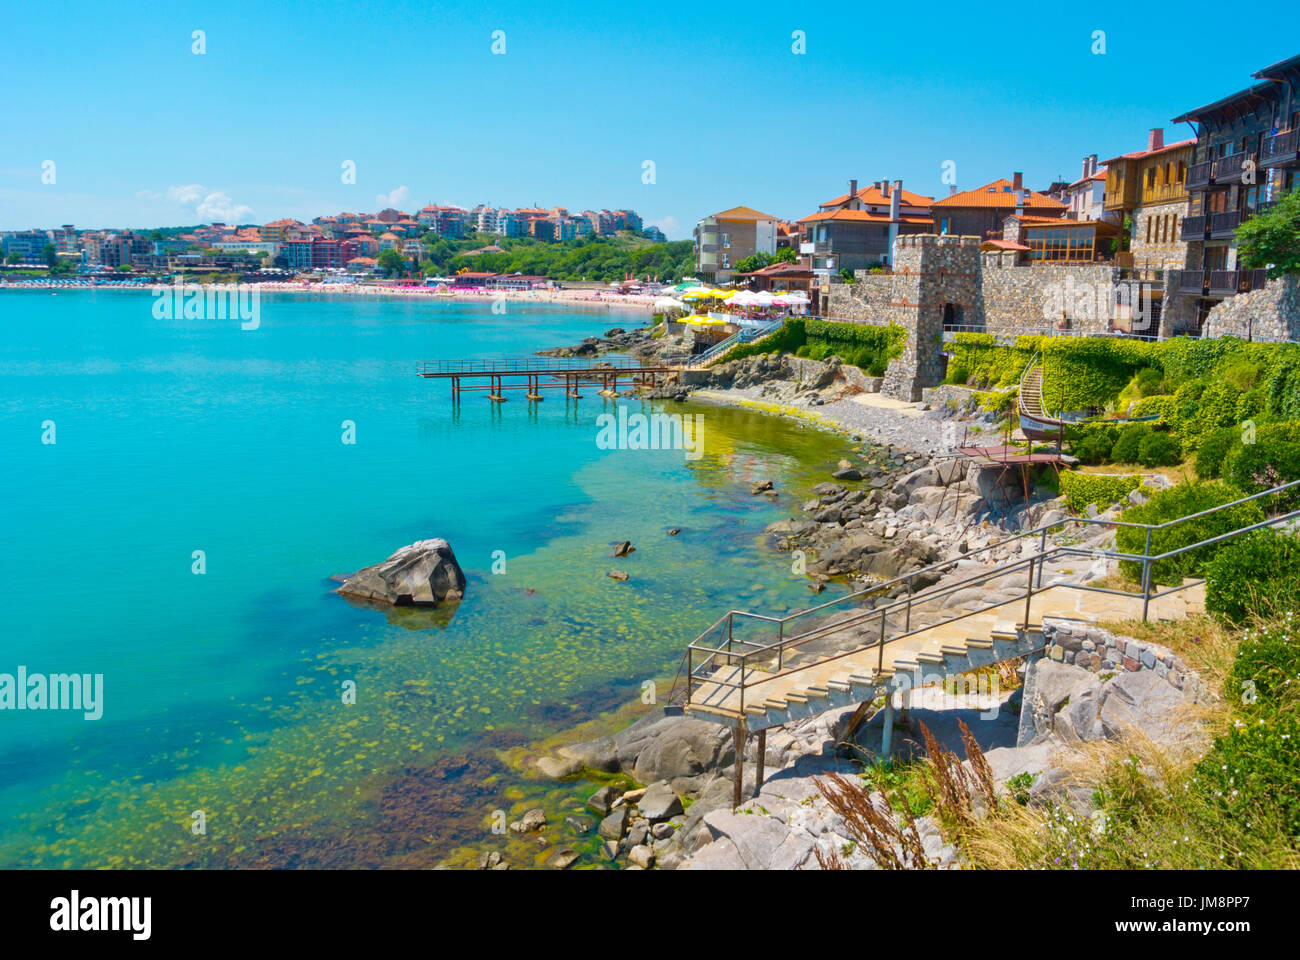 Views on seaside promenade on the south side of old town, Sozopol, Bulgaria Stock Photo